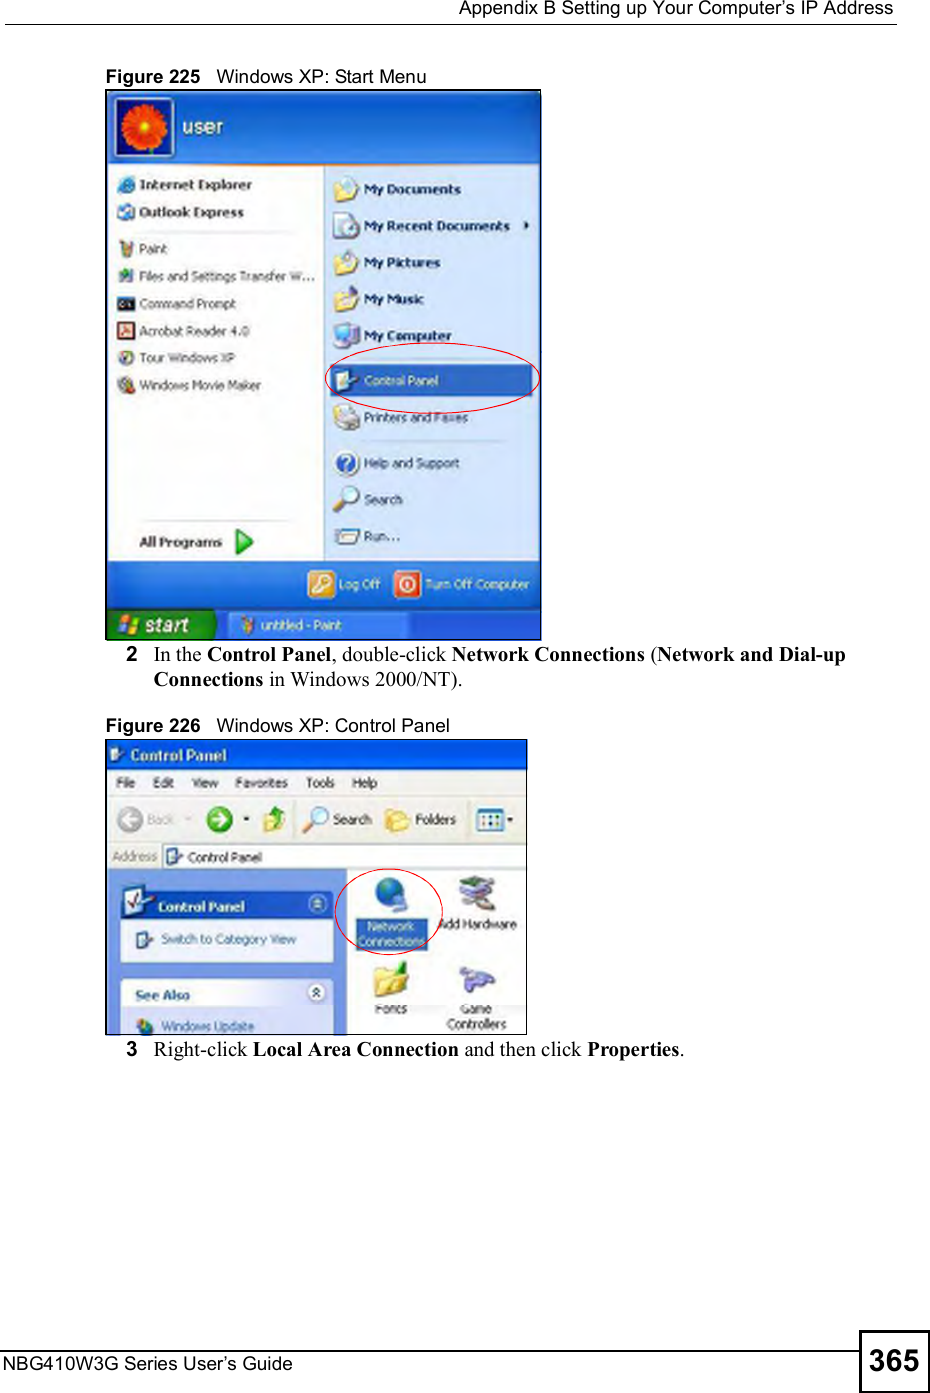  Appendix BSetting up Your Computer s IP AddressNBG410W3G Series User s Guide 365Figure 225   Windows XP: Start Menu2In the Control Panel, double-click Network Connections (Network and Dial-up Connections in Windows 2000/NT).Figure 226   Windows XP: Control Panel3Right-click Local Area Connection and then click Properties.